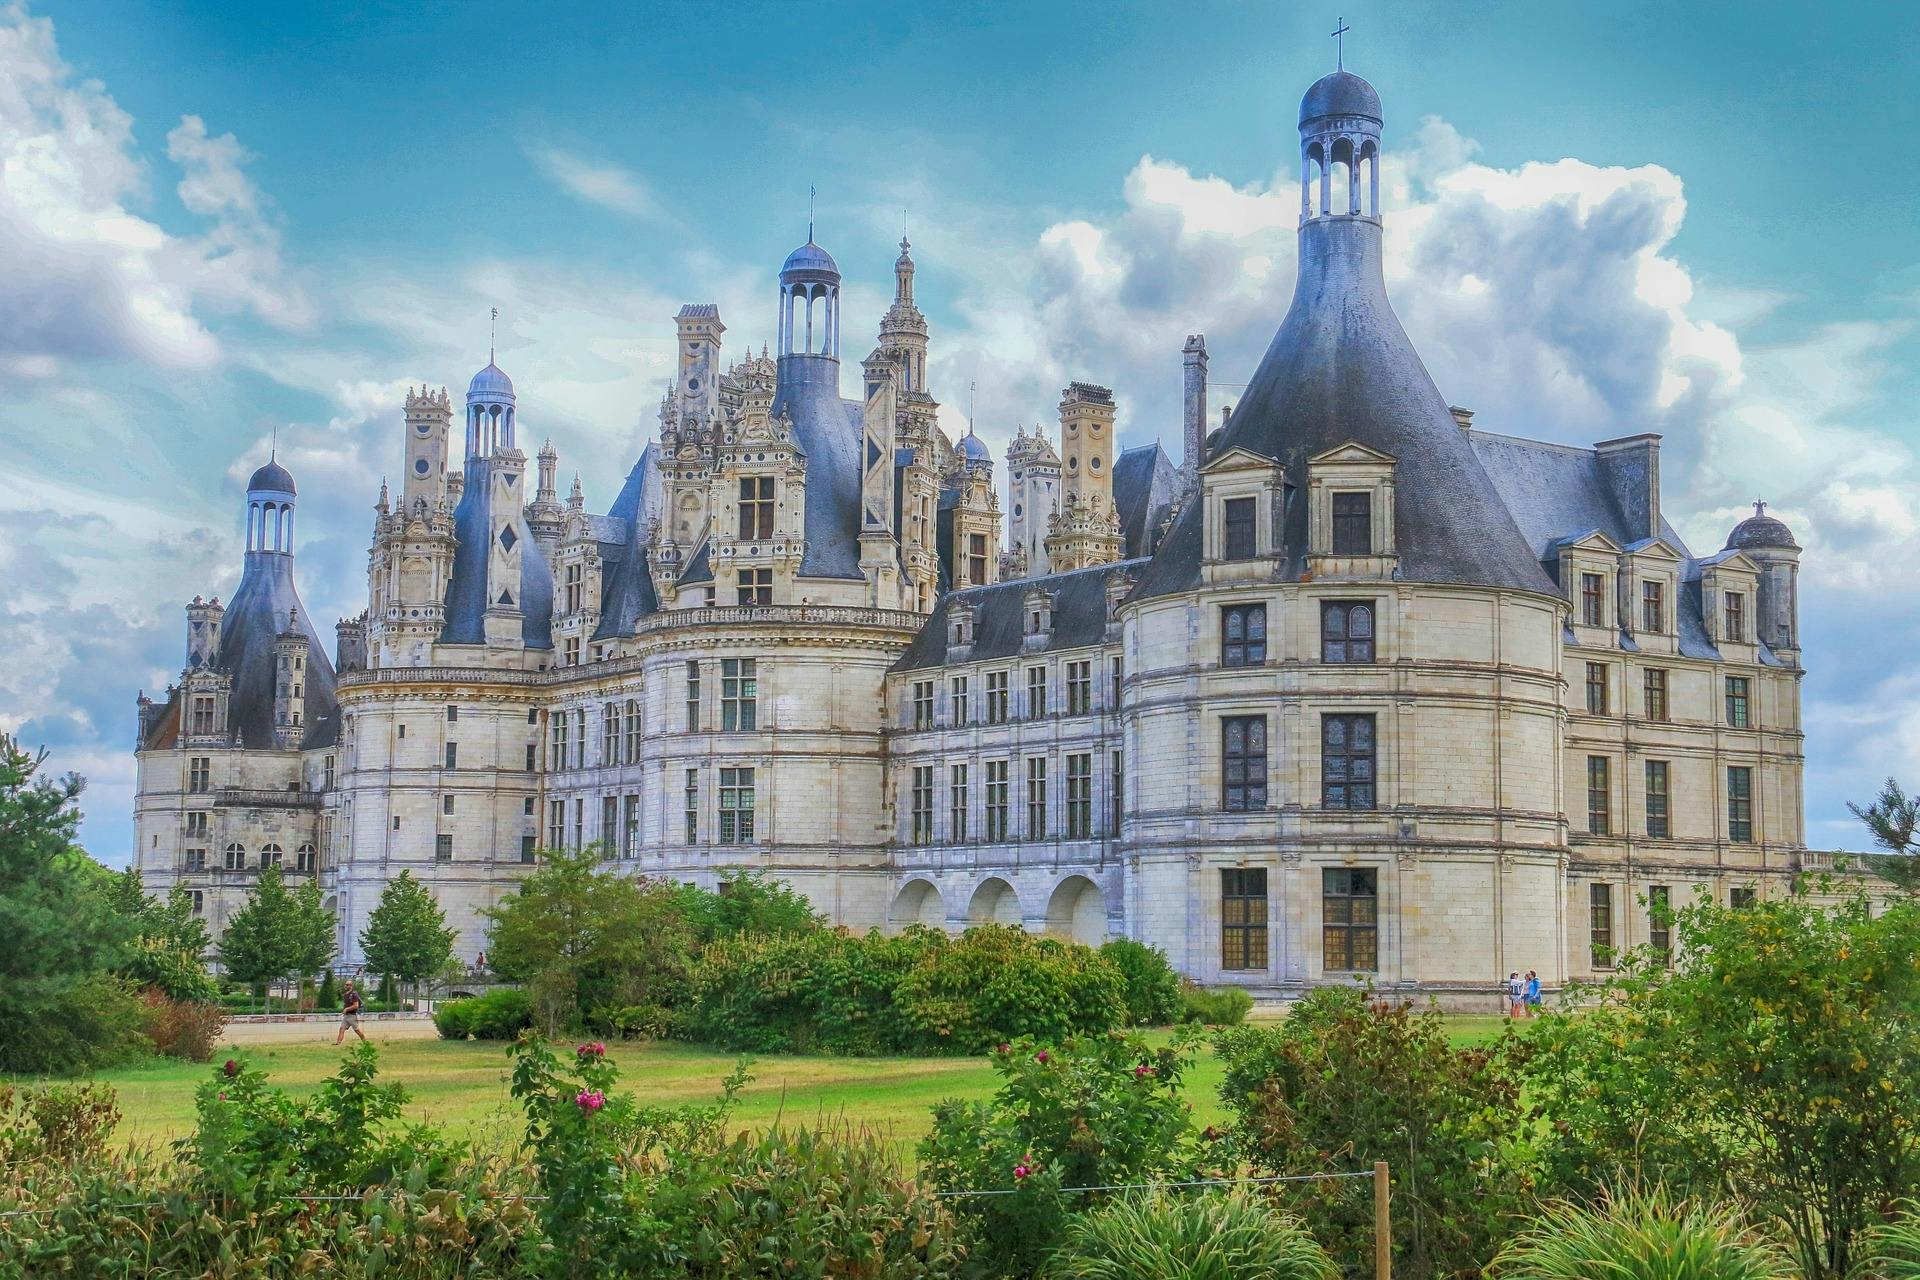 Private tour in Loire Valley with Chenonceau and Chambord wine tasting at